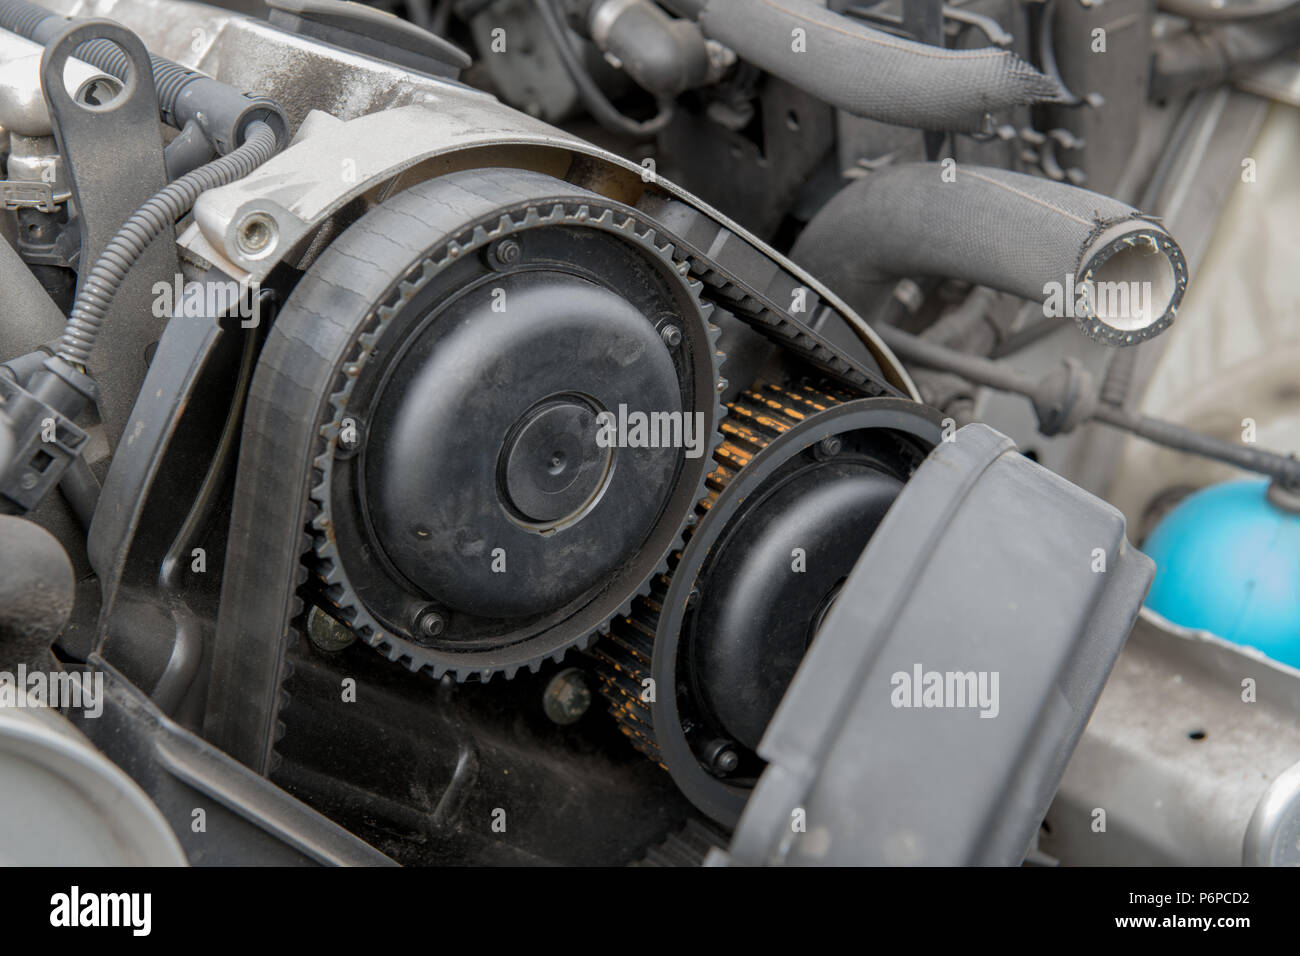 Automobile engine with side cover removed, exposing an old, cracked timing belt Stock Photo